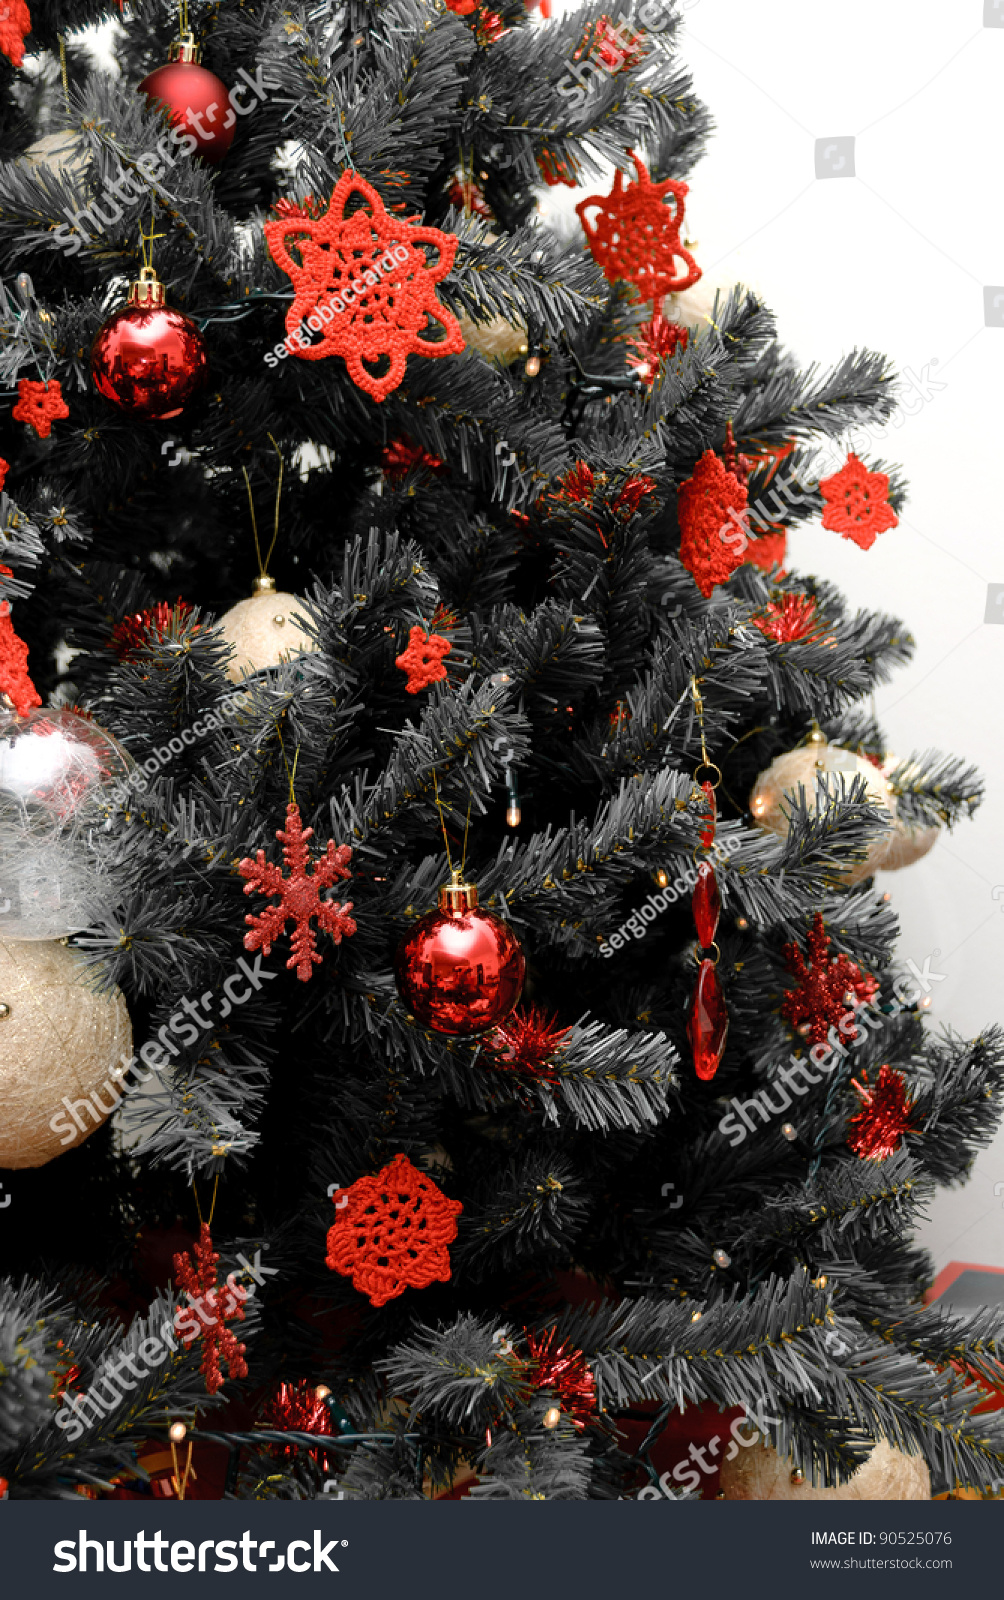 Christmas Tree In Black And White With Red Decorations Stock Photo 90525076 : Shutterstock